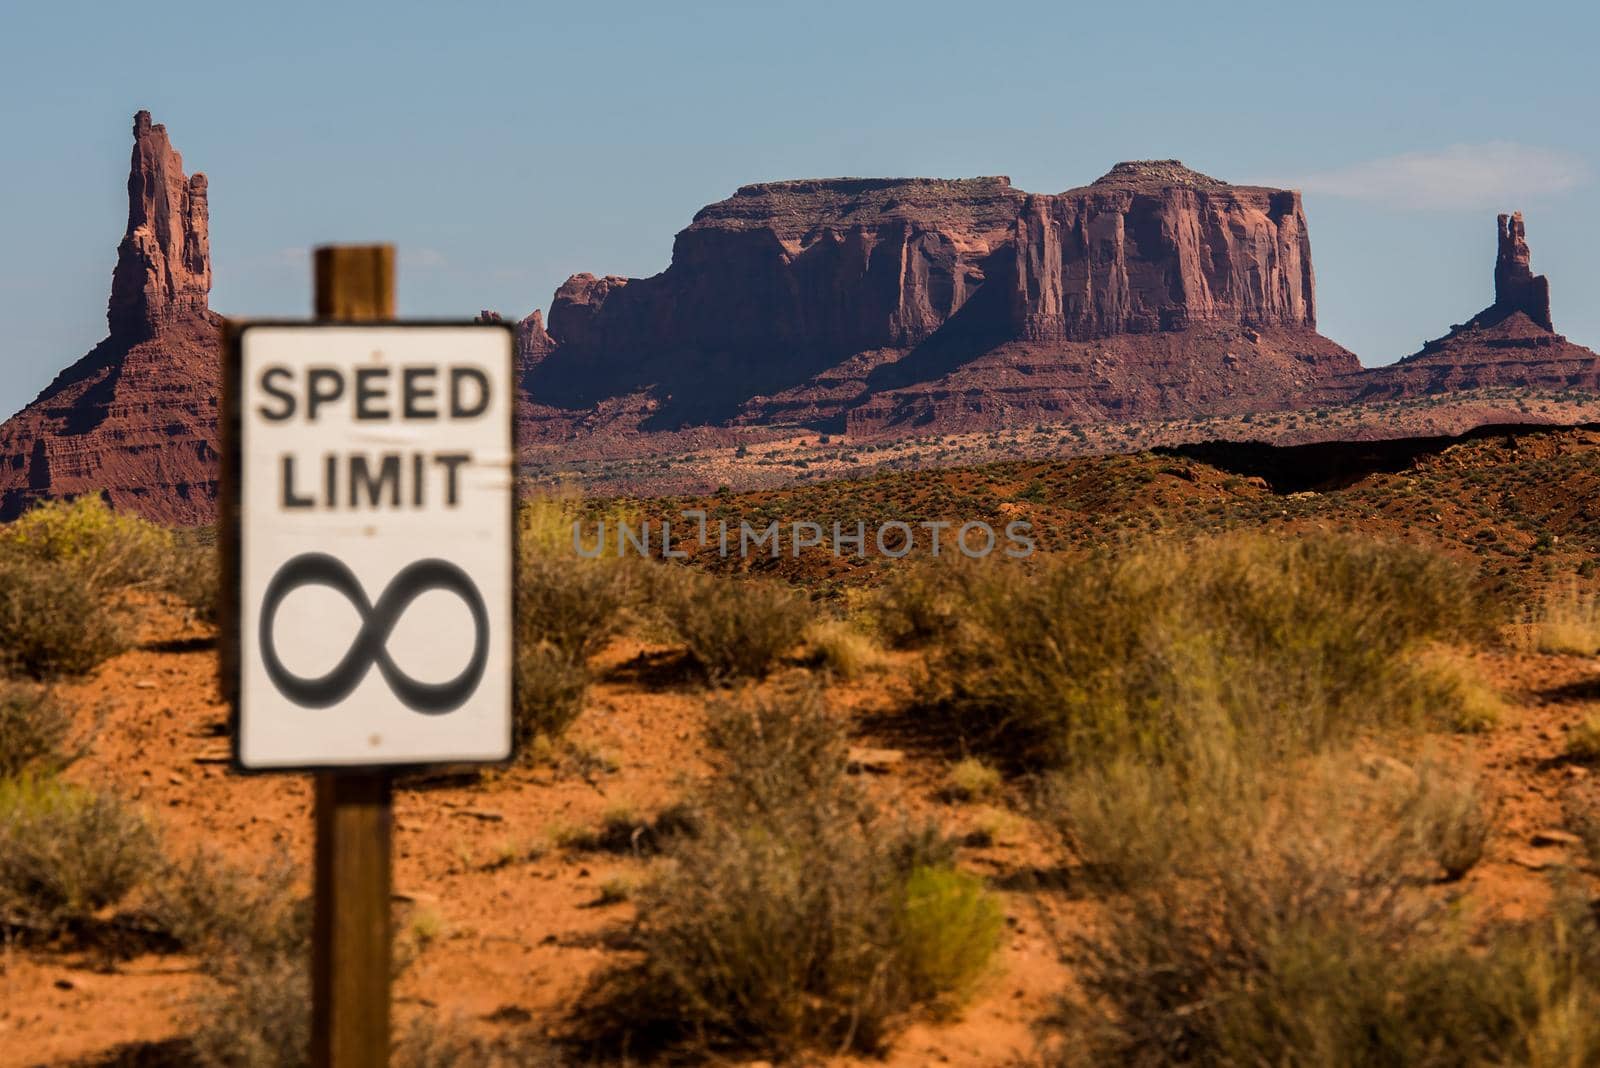 Speed limit infinity with Monument Valley mesas in the background by jyurinko